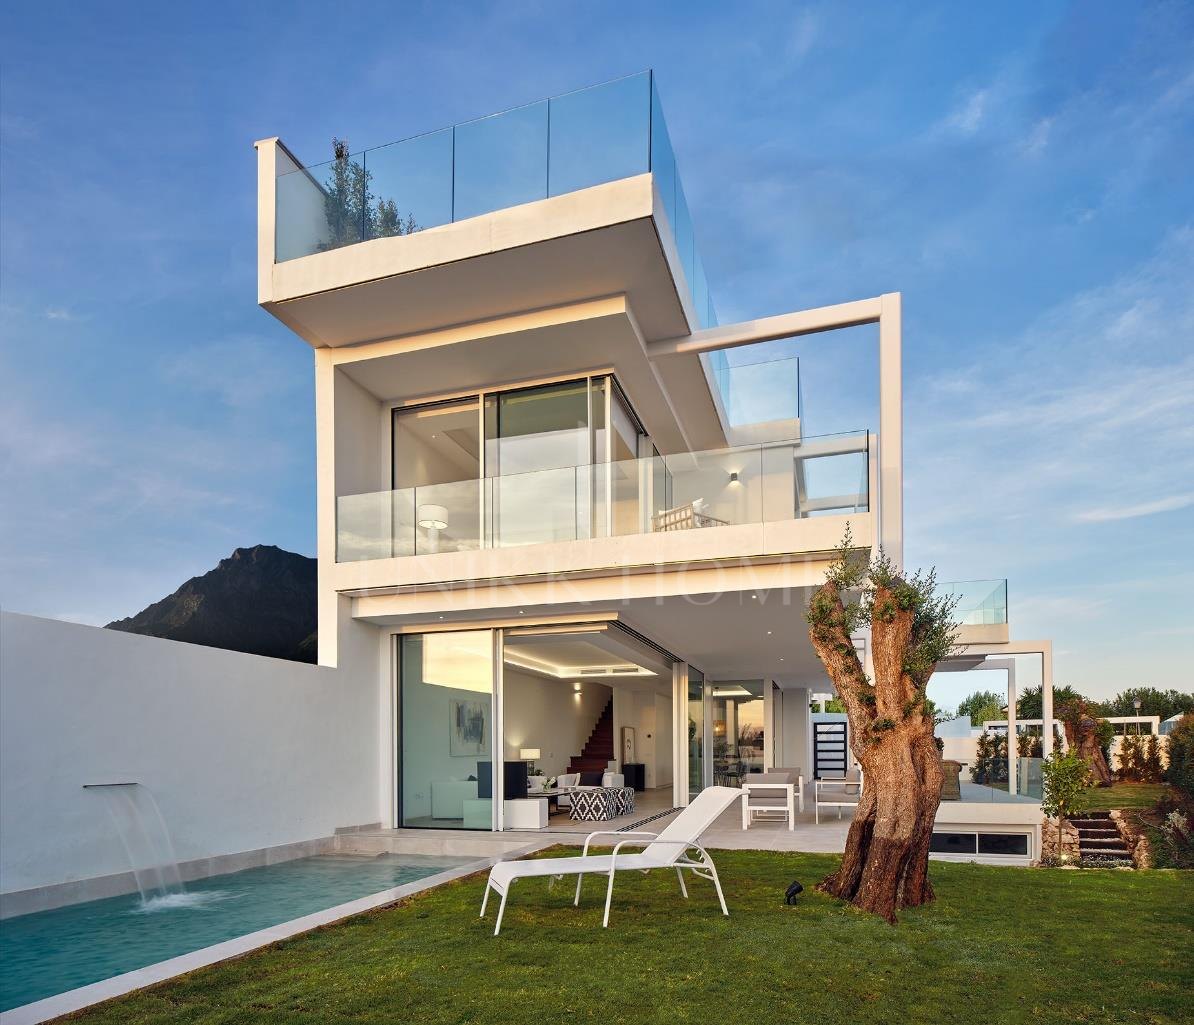 TURN KEY NEW BUILT MODERN VILLA WITH SEA VIEWS AND PRIVATE POOL CLOSE TO MARBELLA CENTER